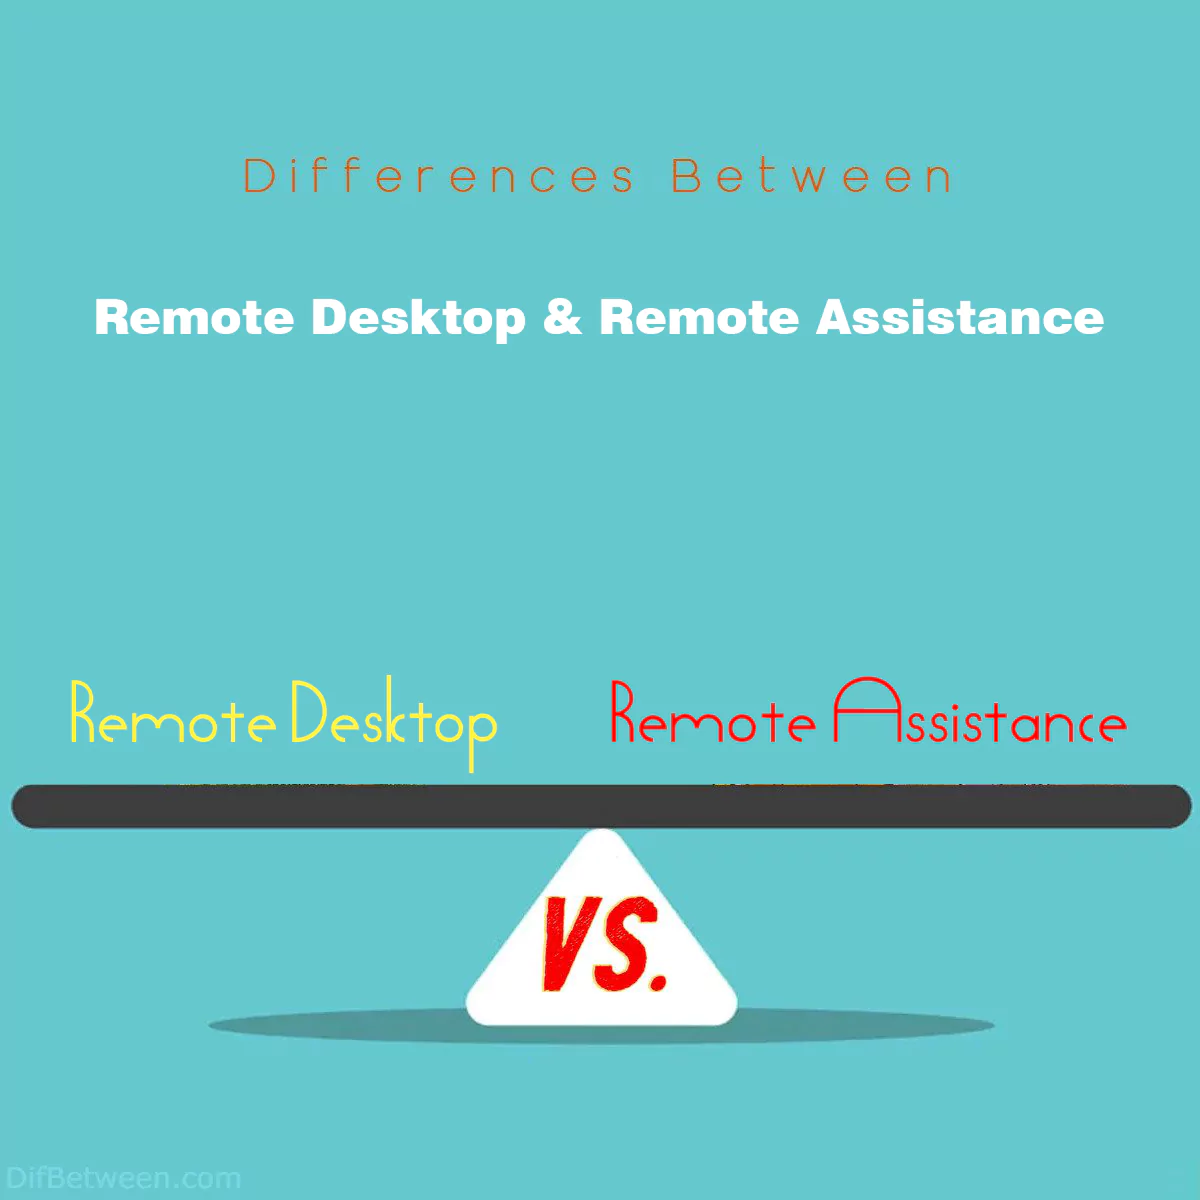 Differences Between Remote Desktop and Remote Assistance